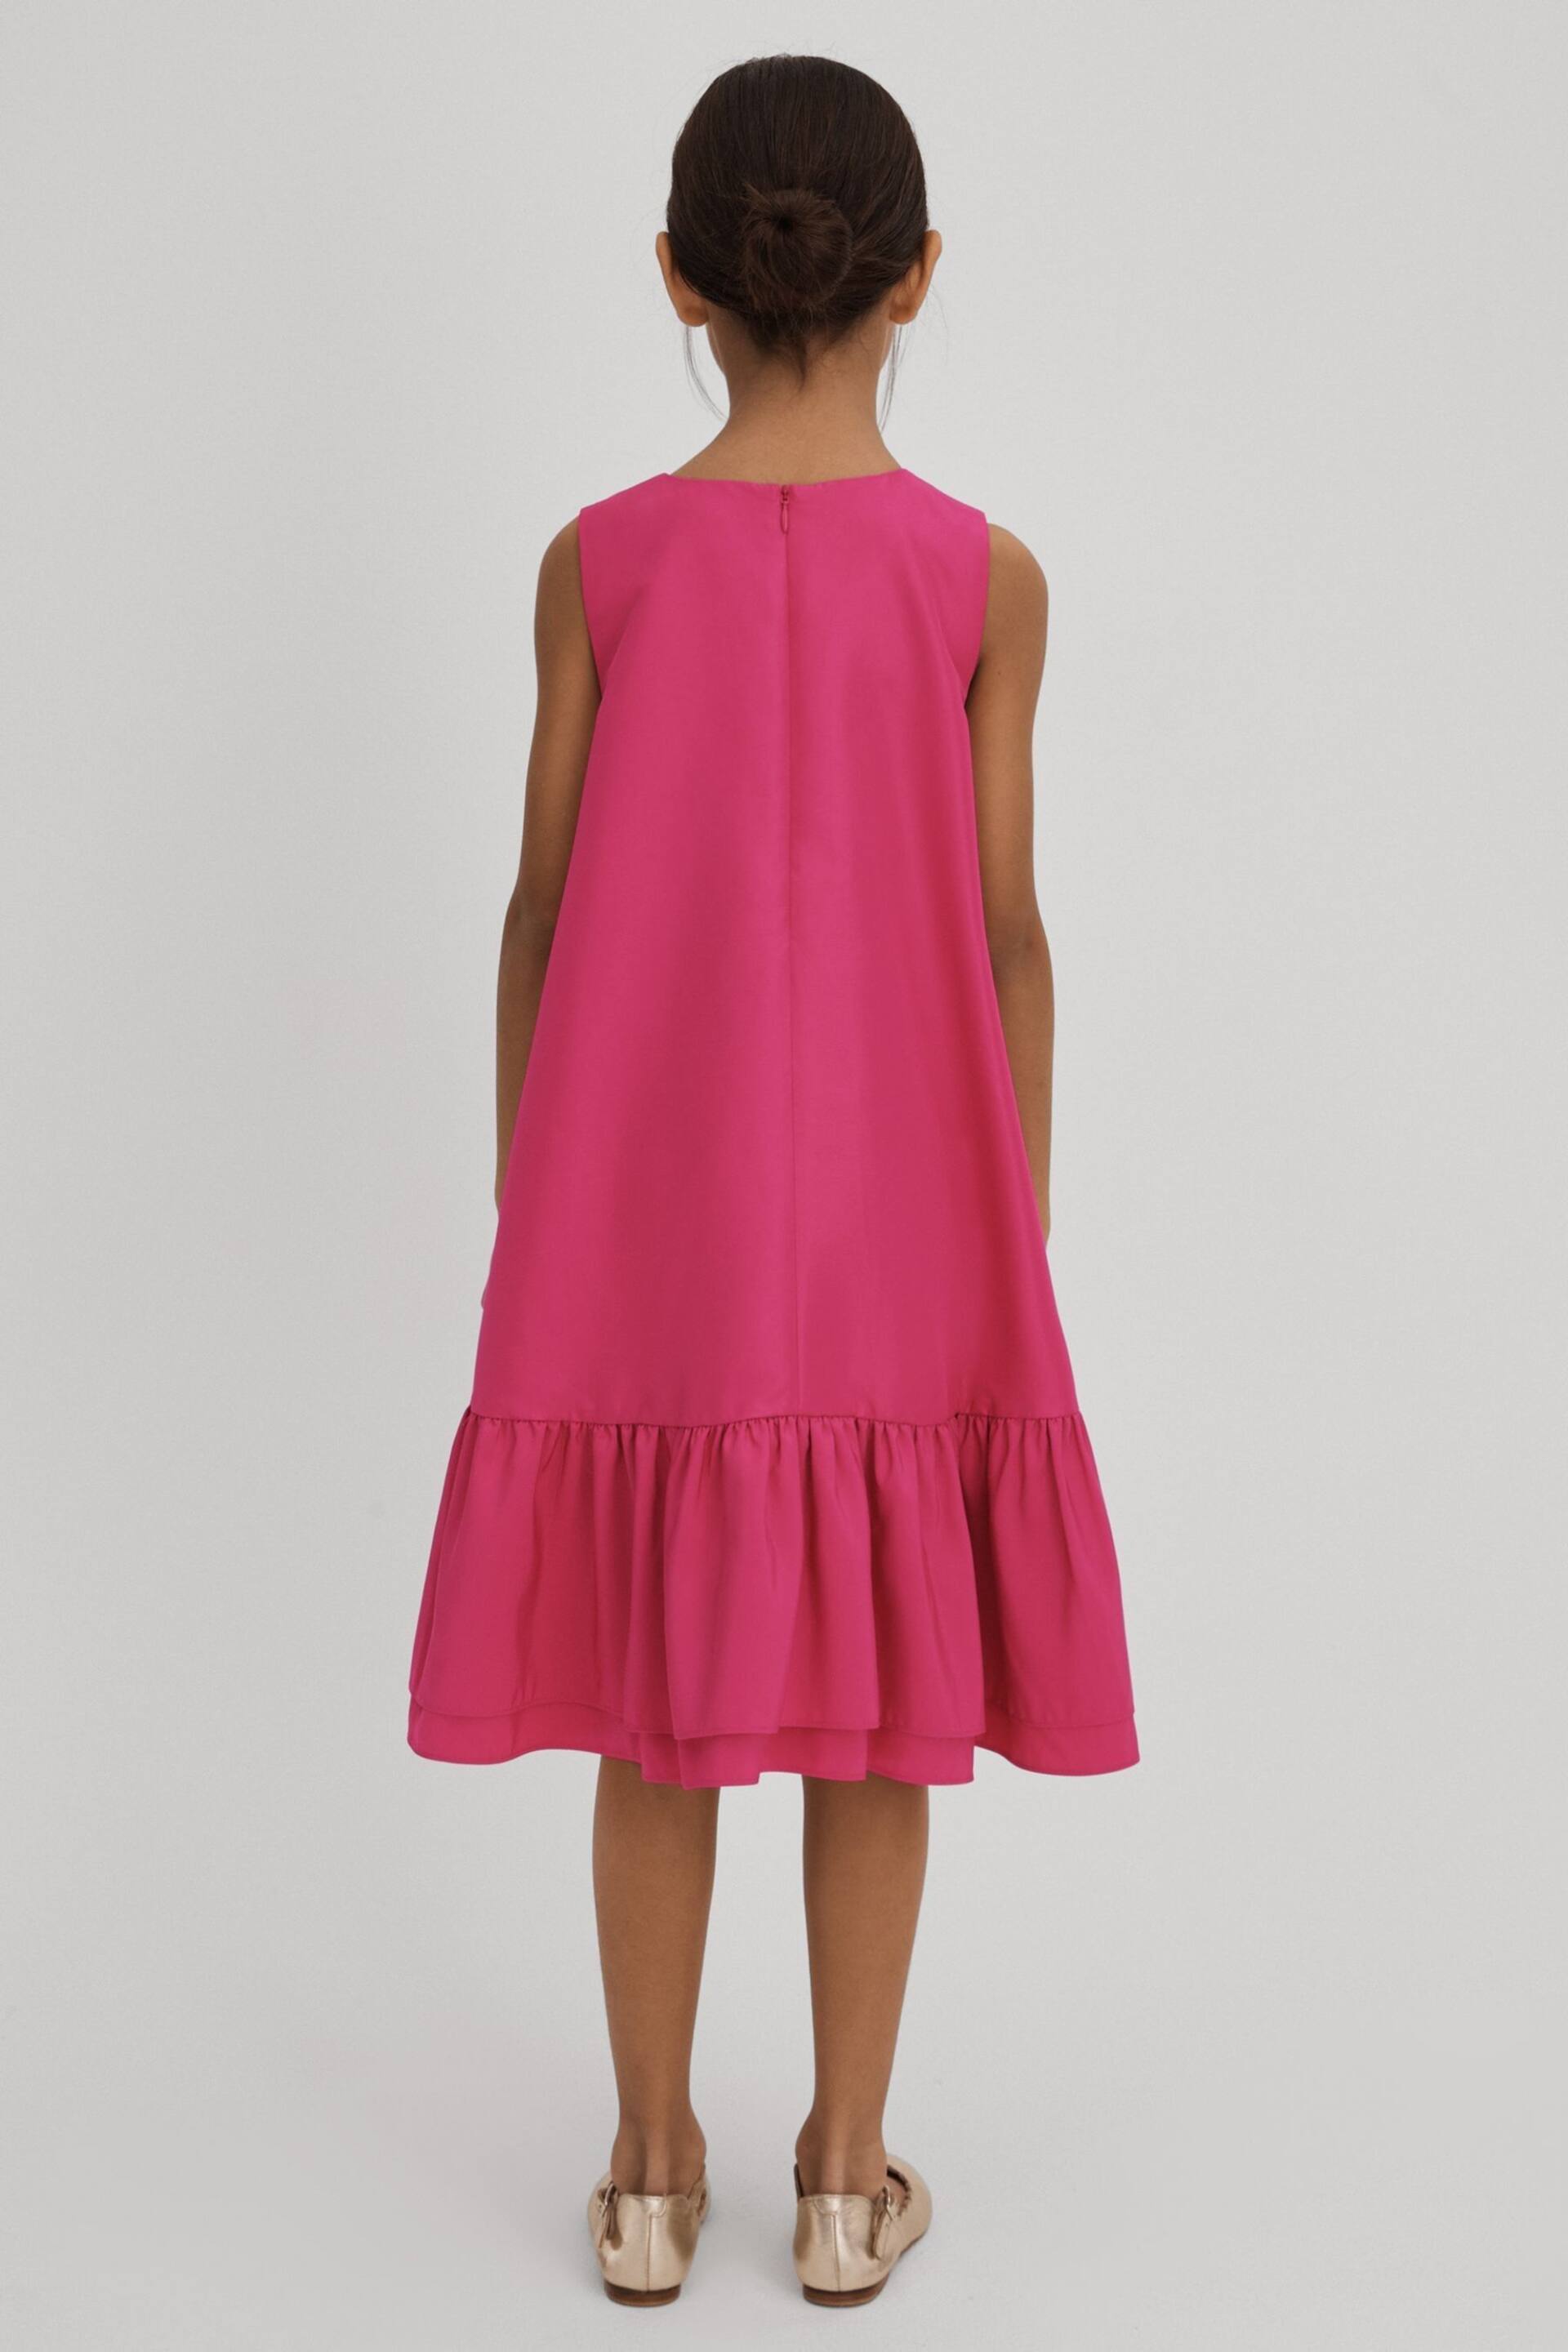 Reiss Bright Pink Cherie Junior Layered High-Low Dress - Image 6 of 7